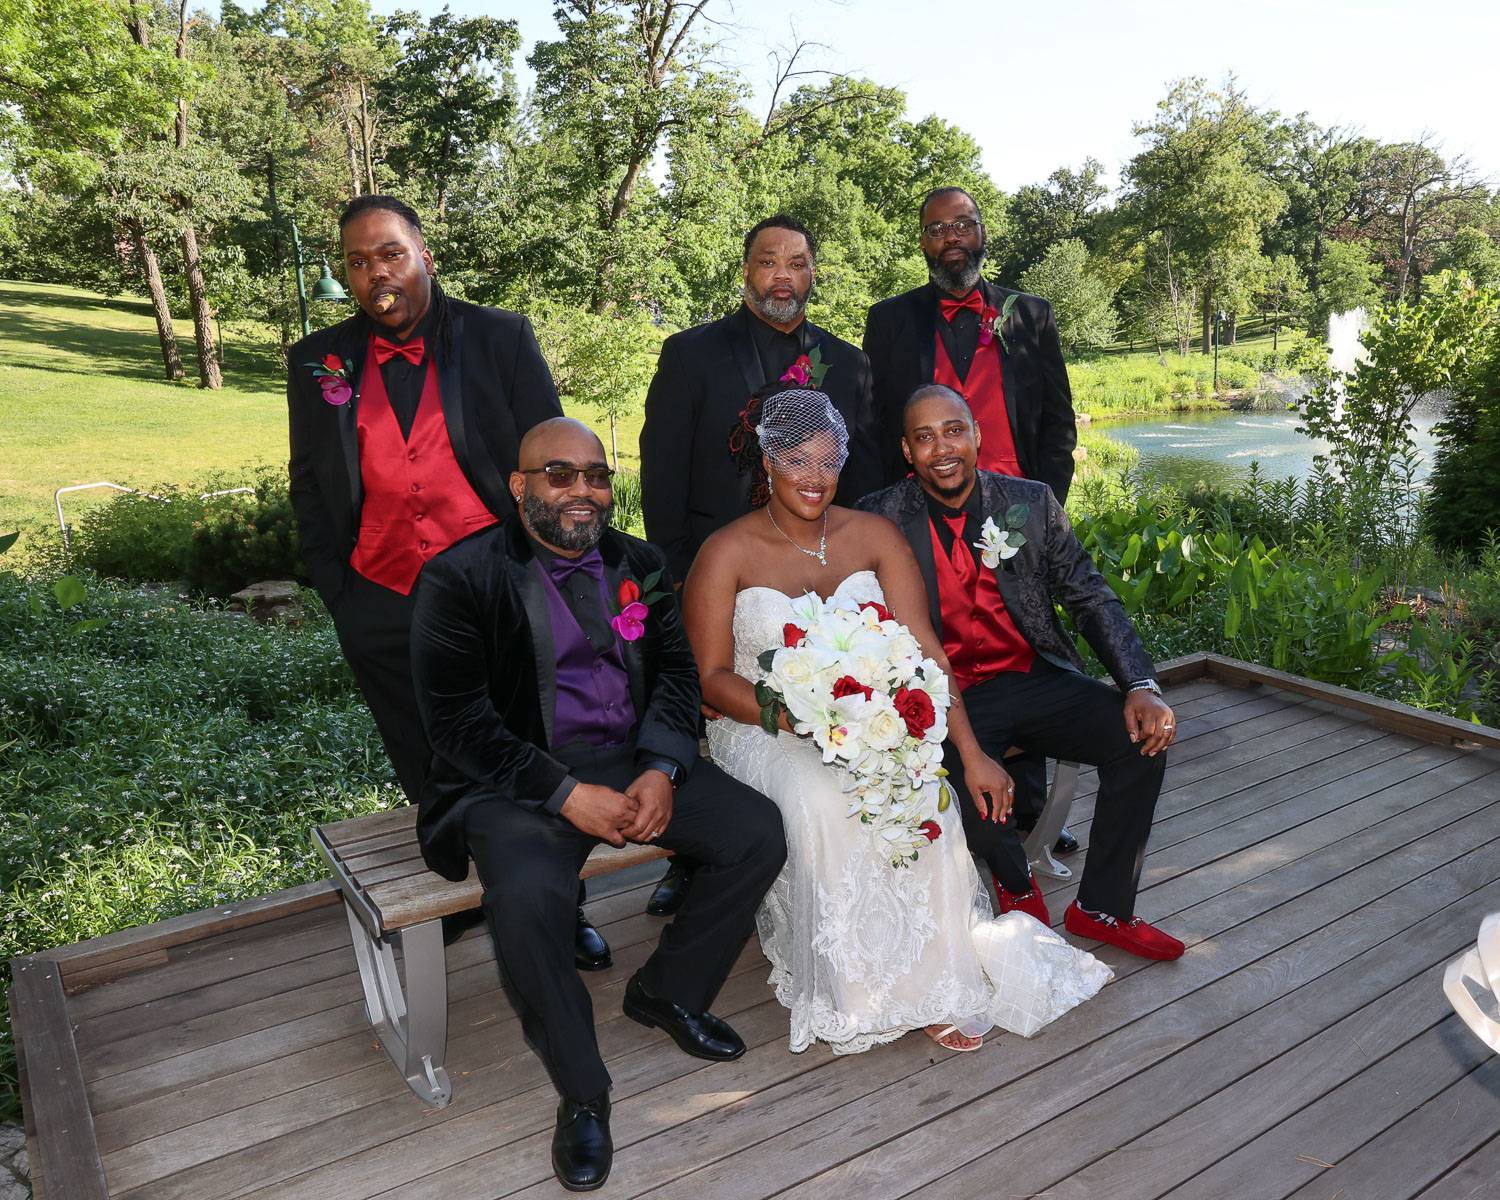 The newlyweds with the groomsmen in the garden